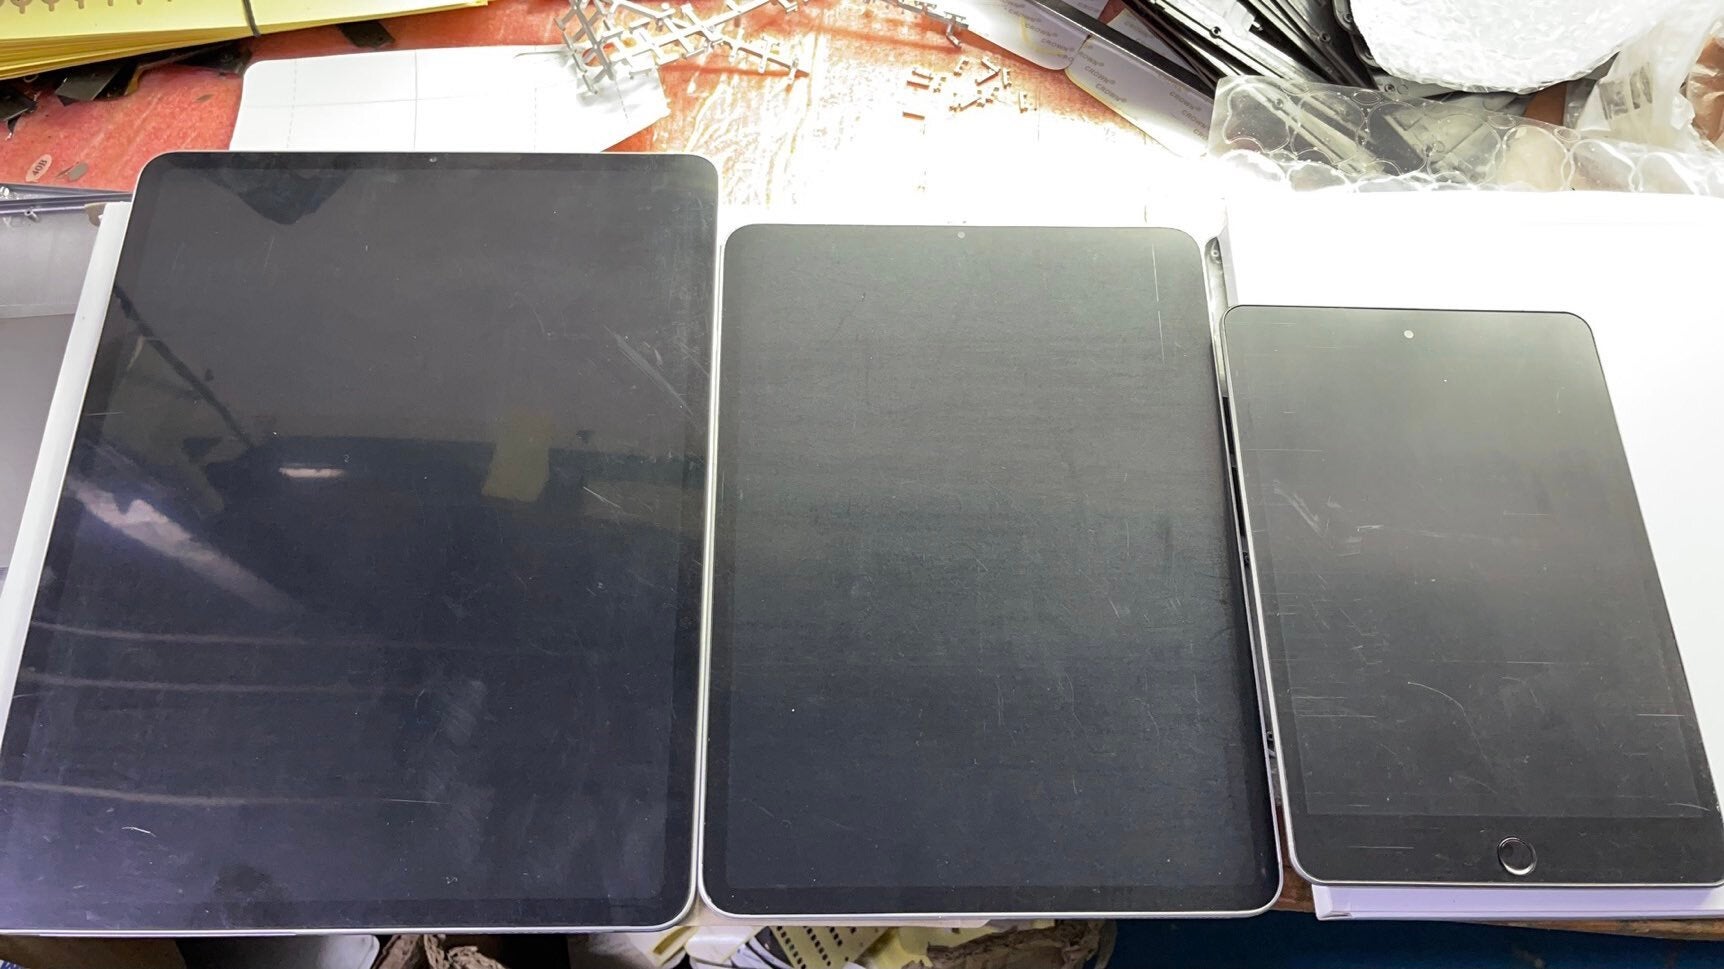 The alleged iPad Pro 2021 and iPad mini 6 model dummies - Alleged iPad Pro and iPad mini 2021 model dummies show little changes